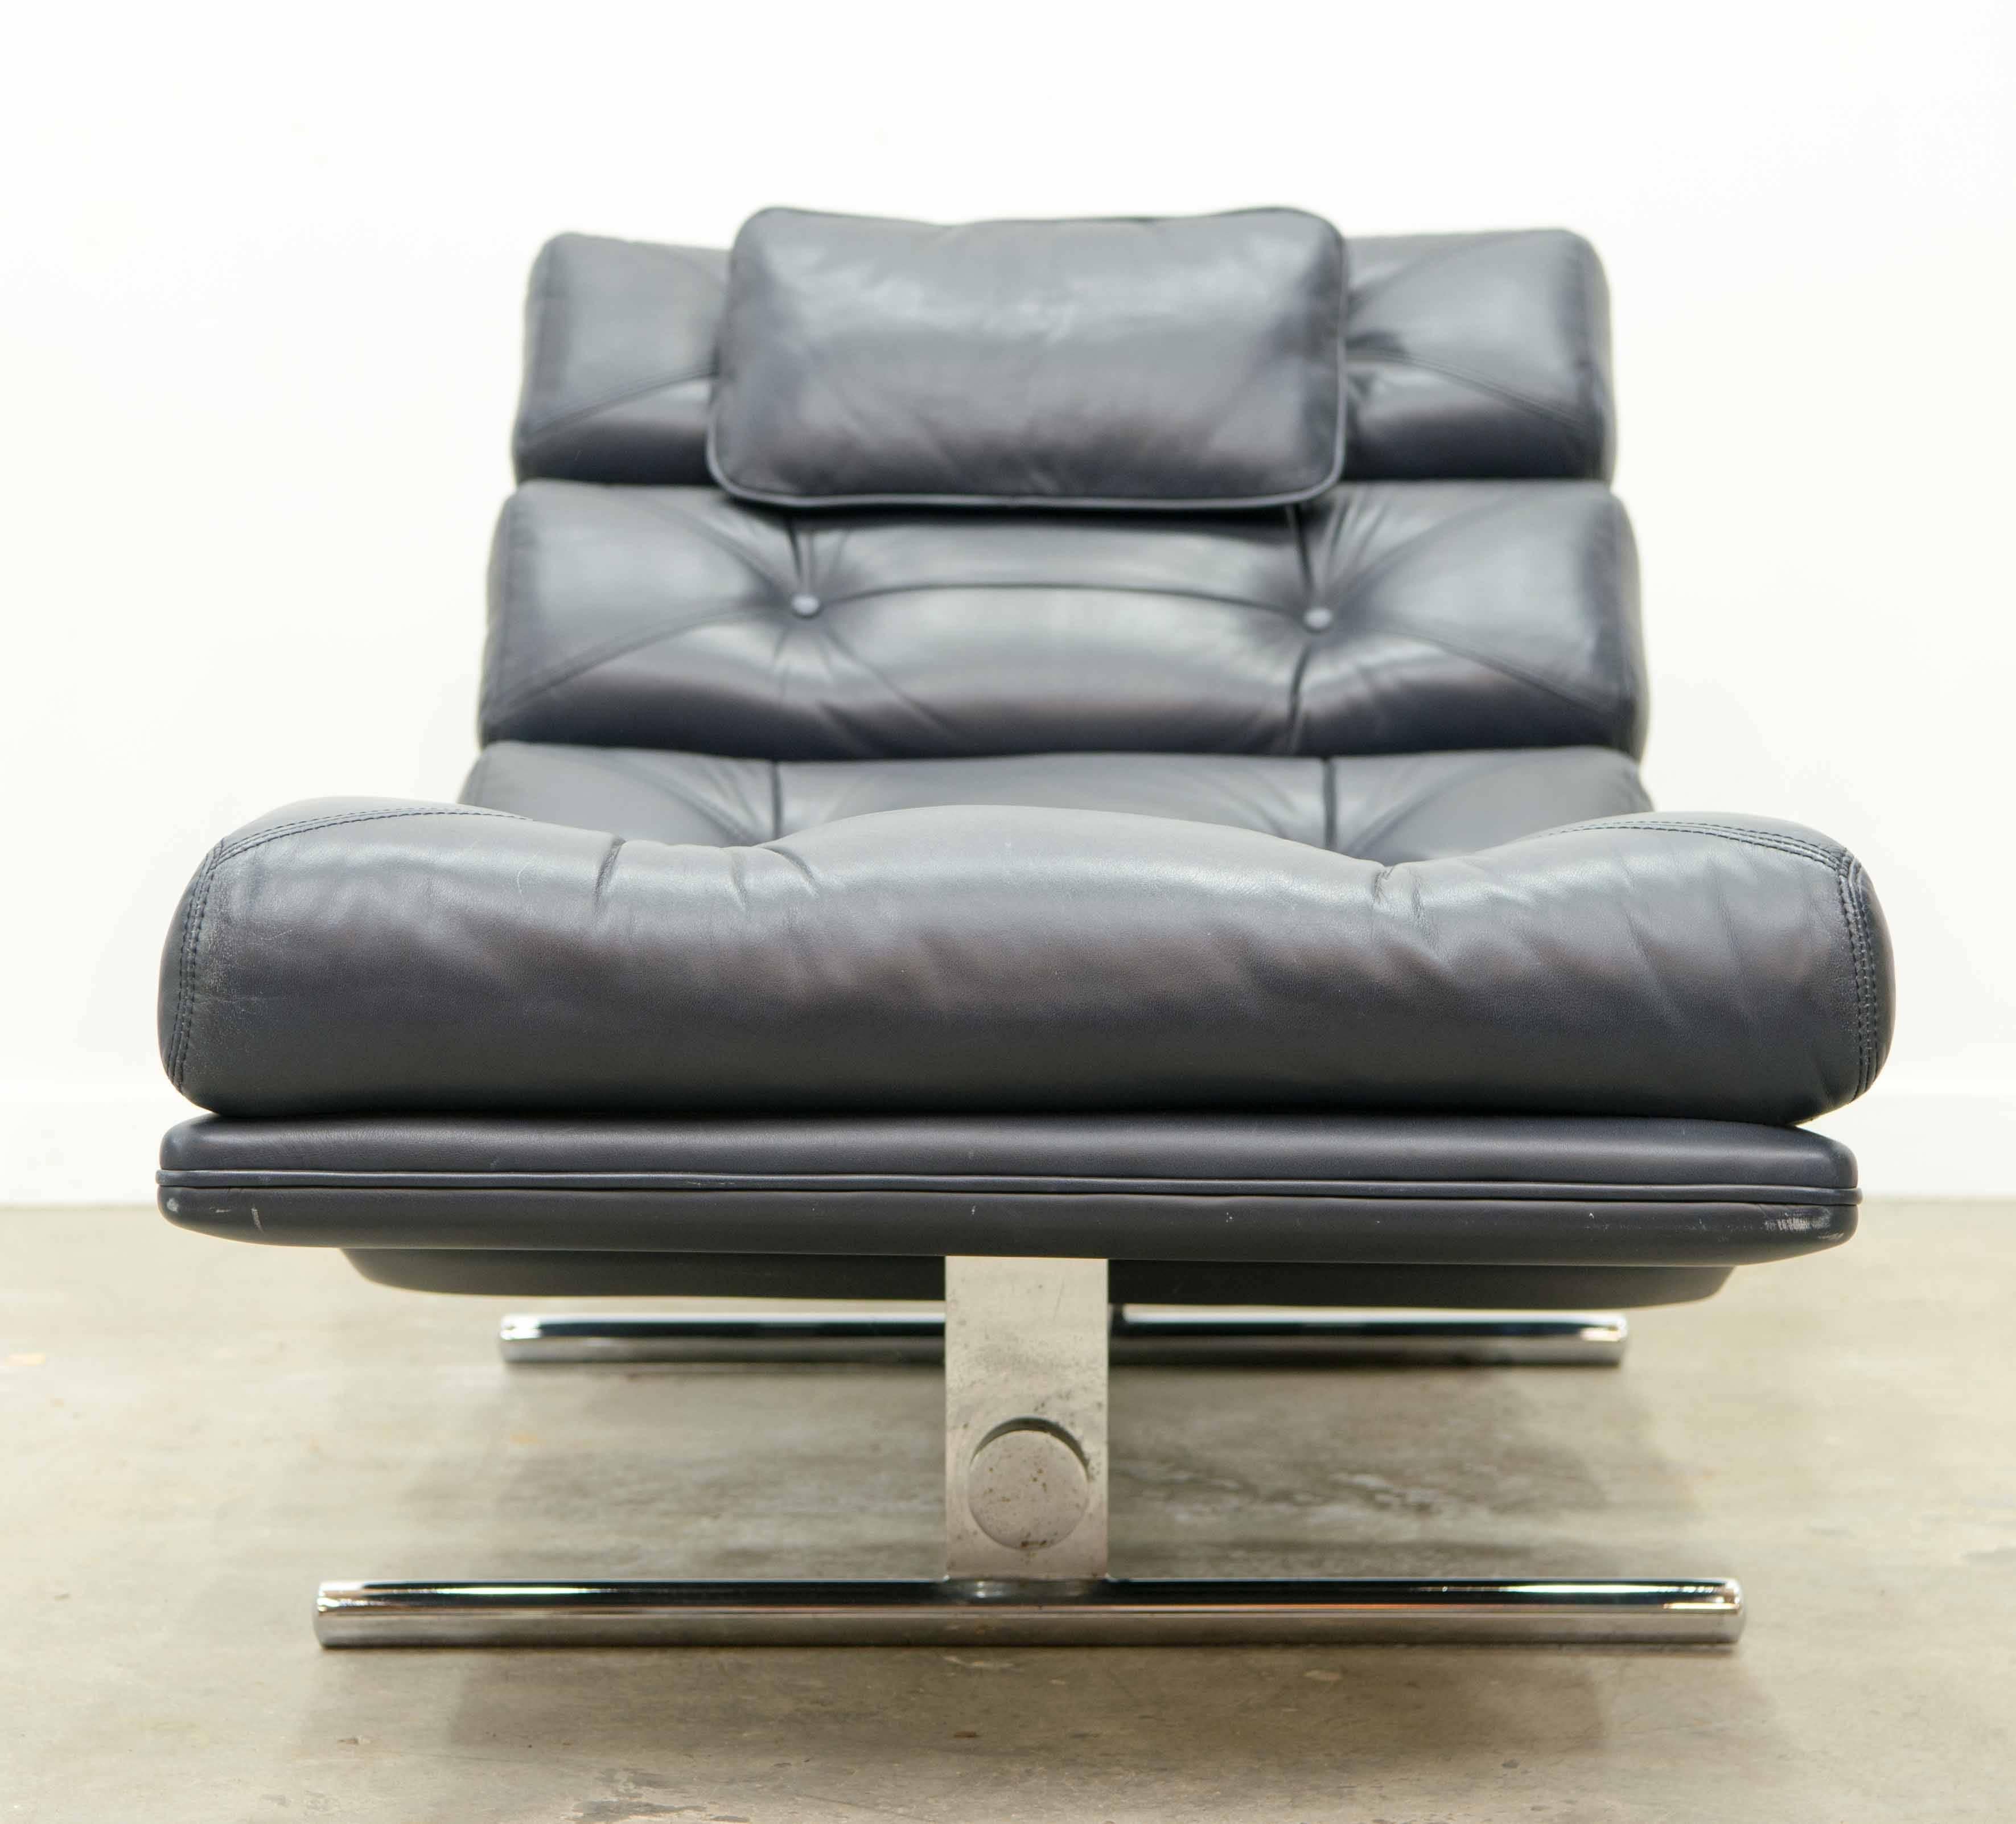 Lord, Chaise Longue in Leather Made by Belgian Company Gervan 1